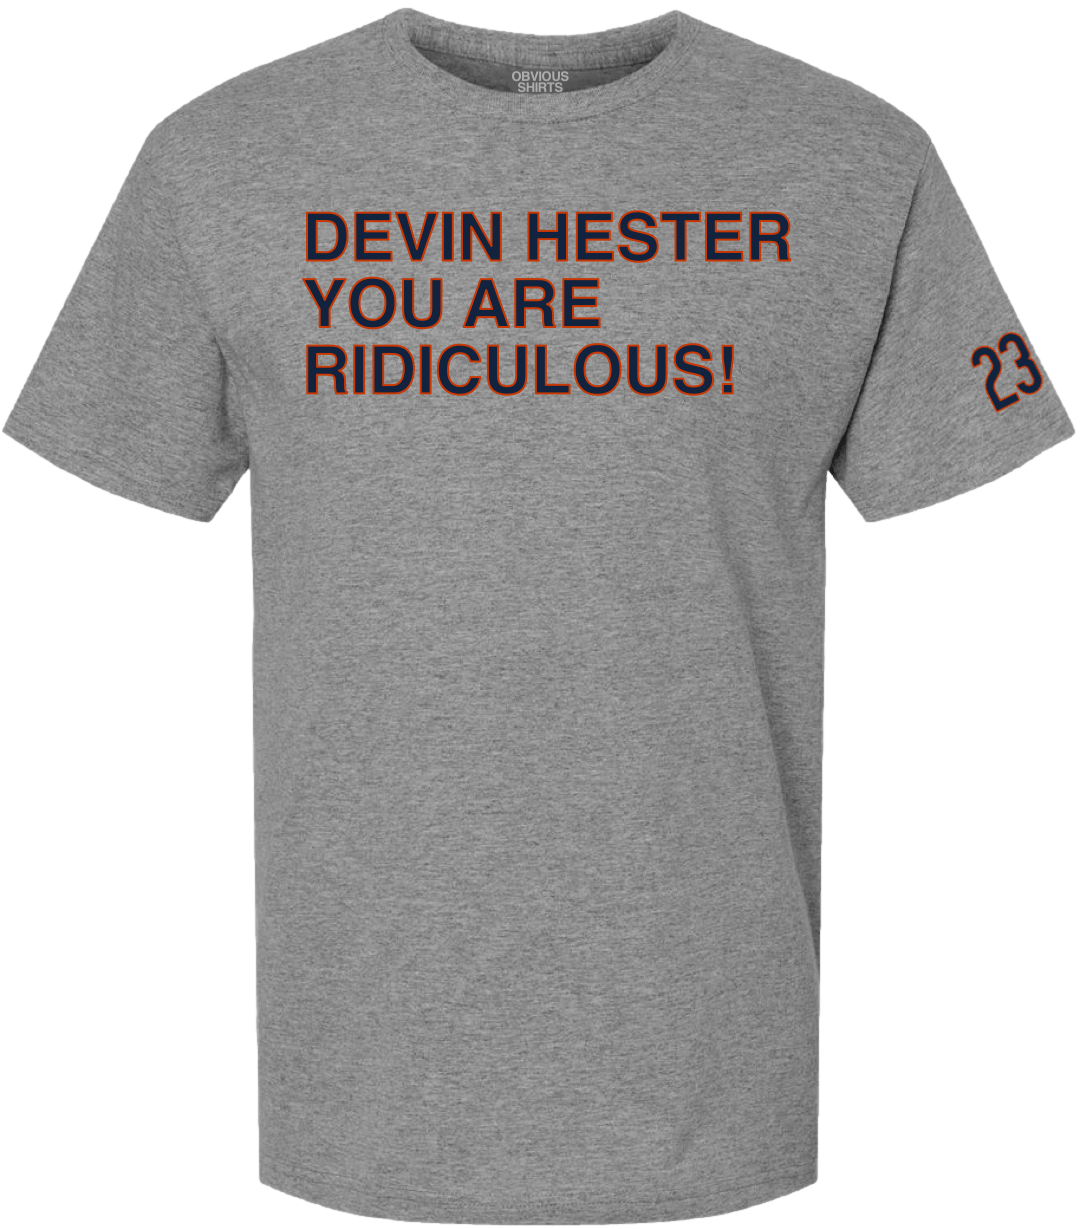 DEVIN HESTER YOU ARE RIDICULOUS! - OBVIOUS SHIRTS